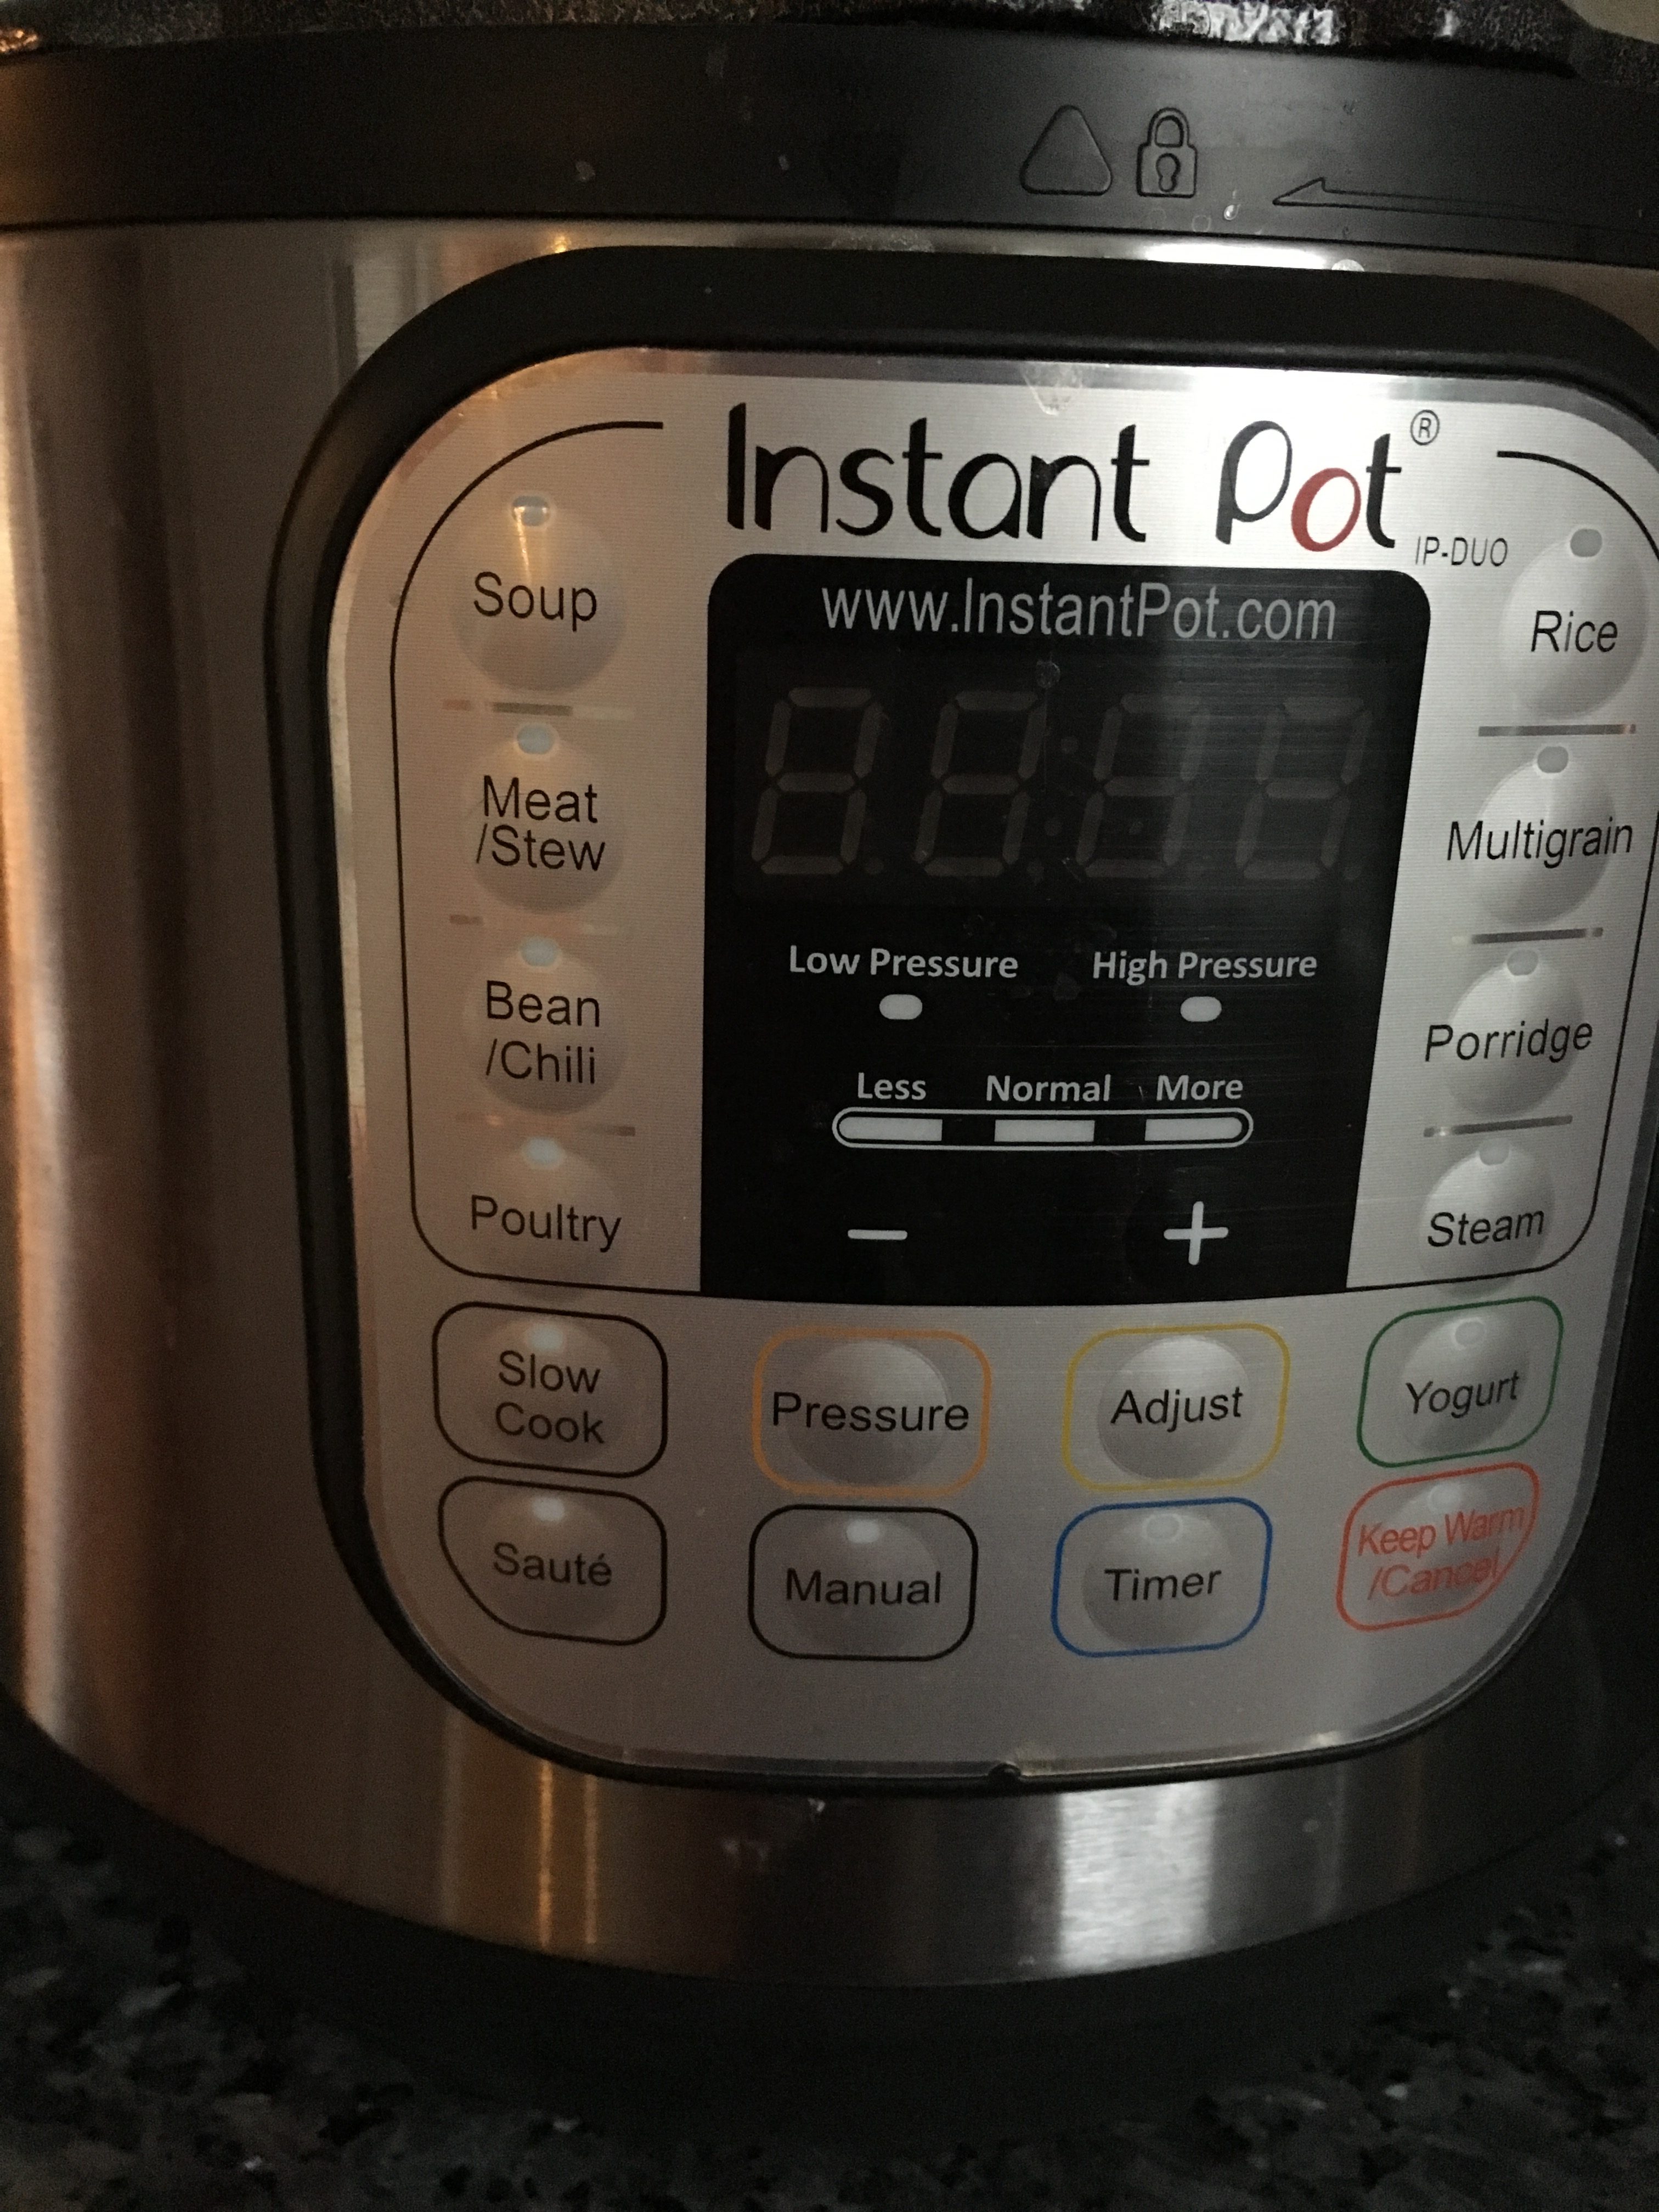 My very own Instant pot! I love it so much.